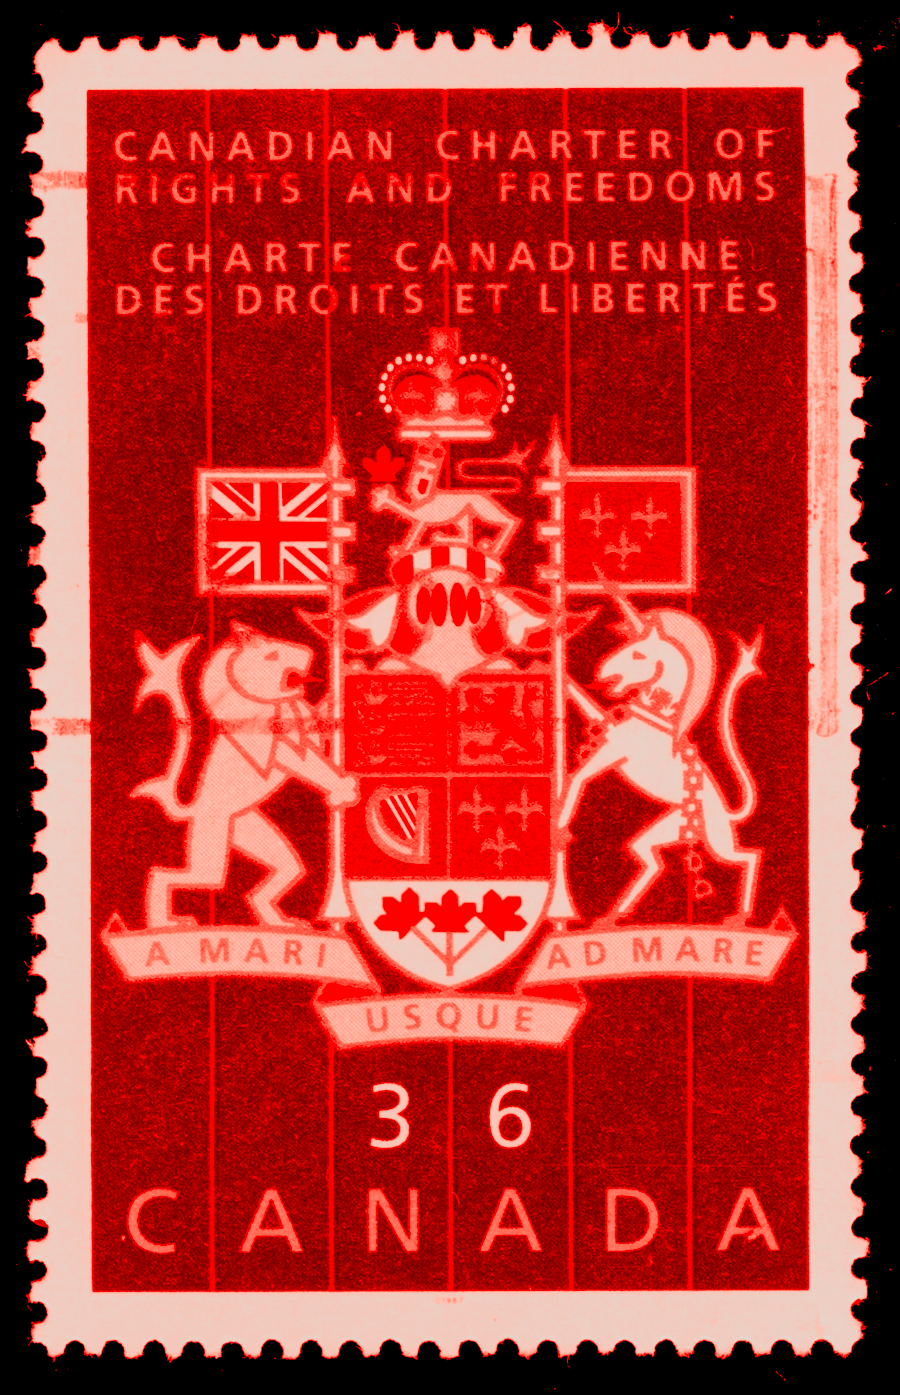 postage stamp with words canada charter of rights and freedoms and a seal